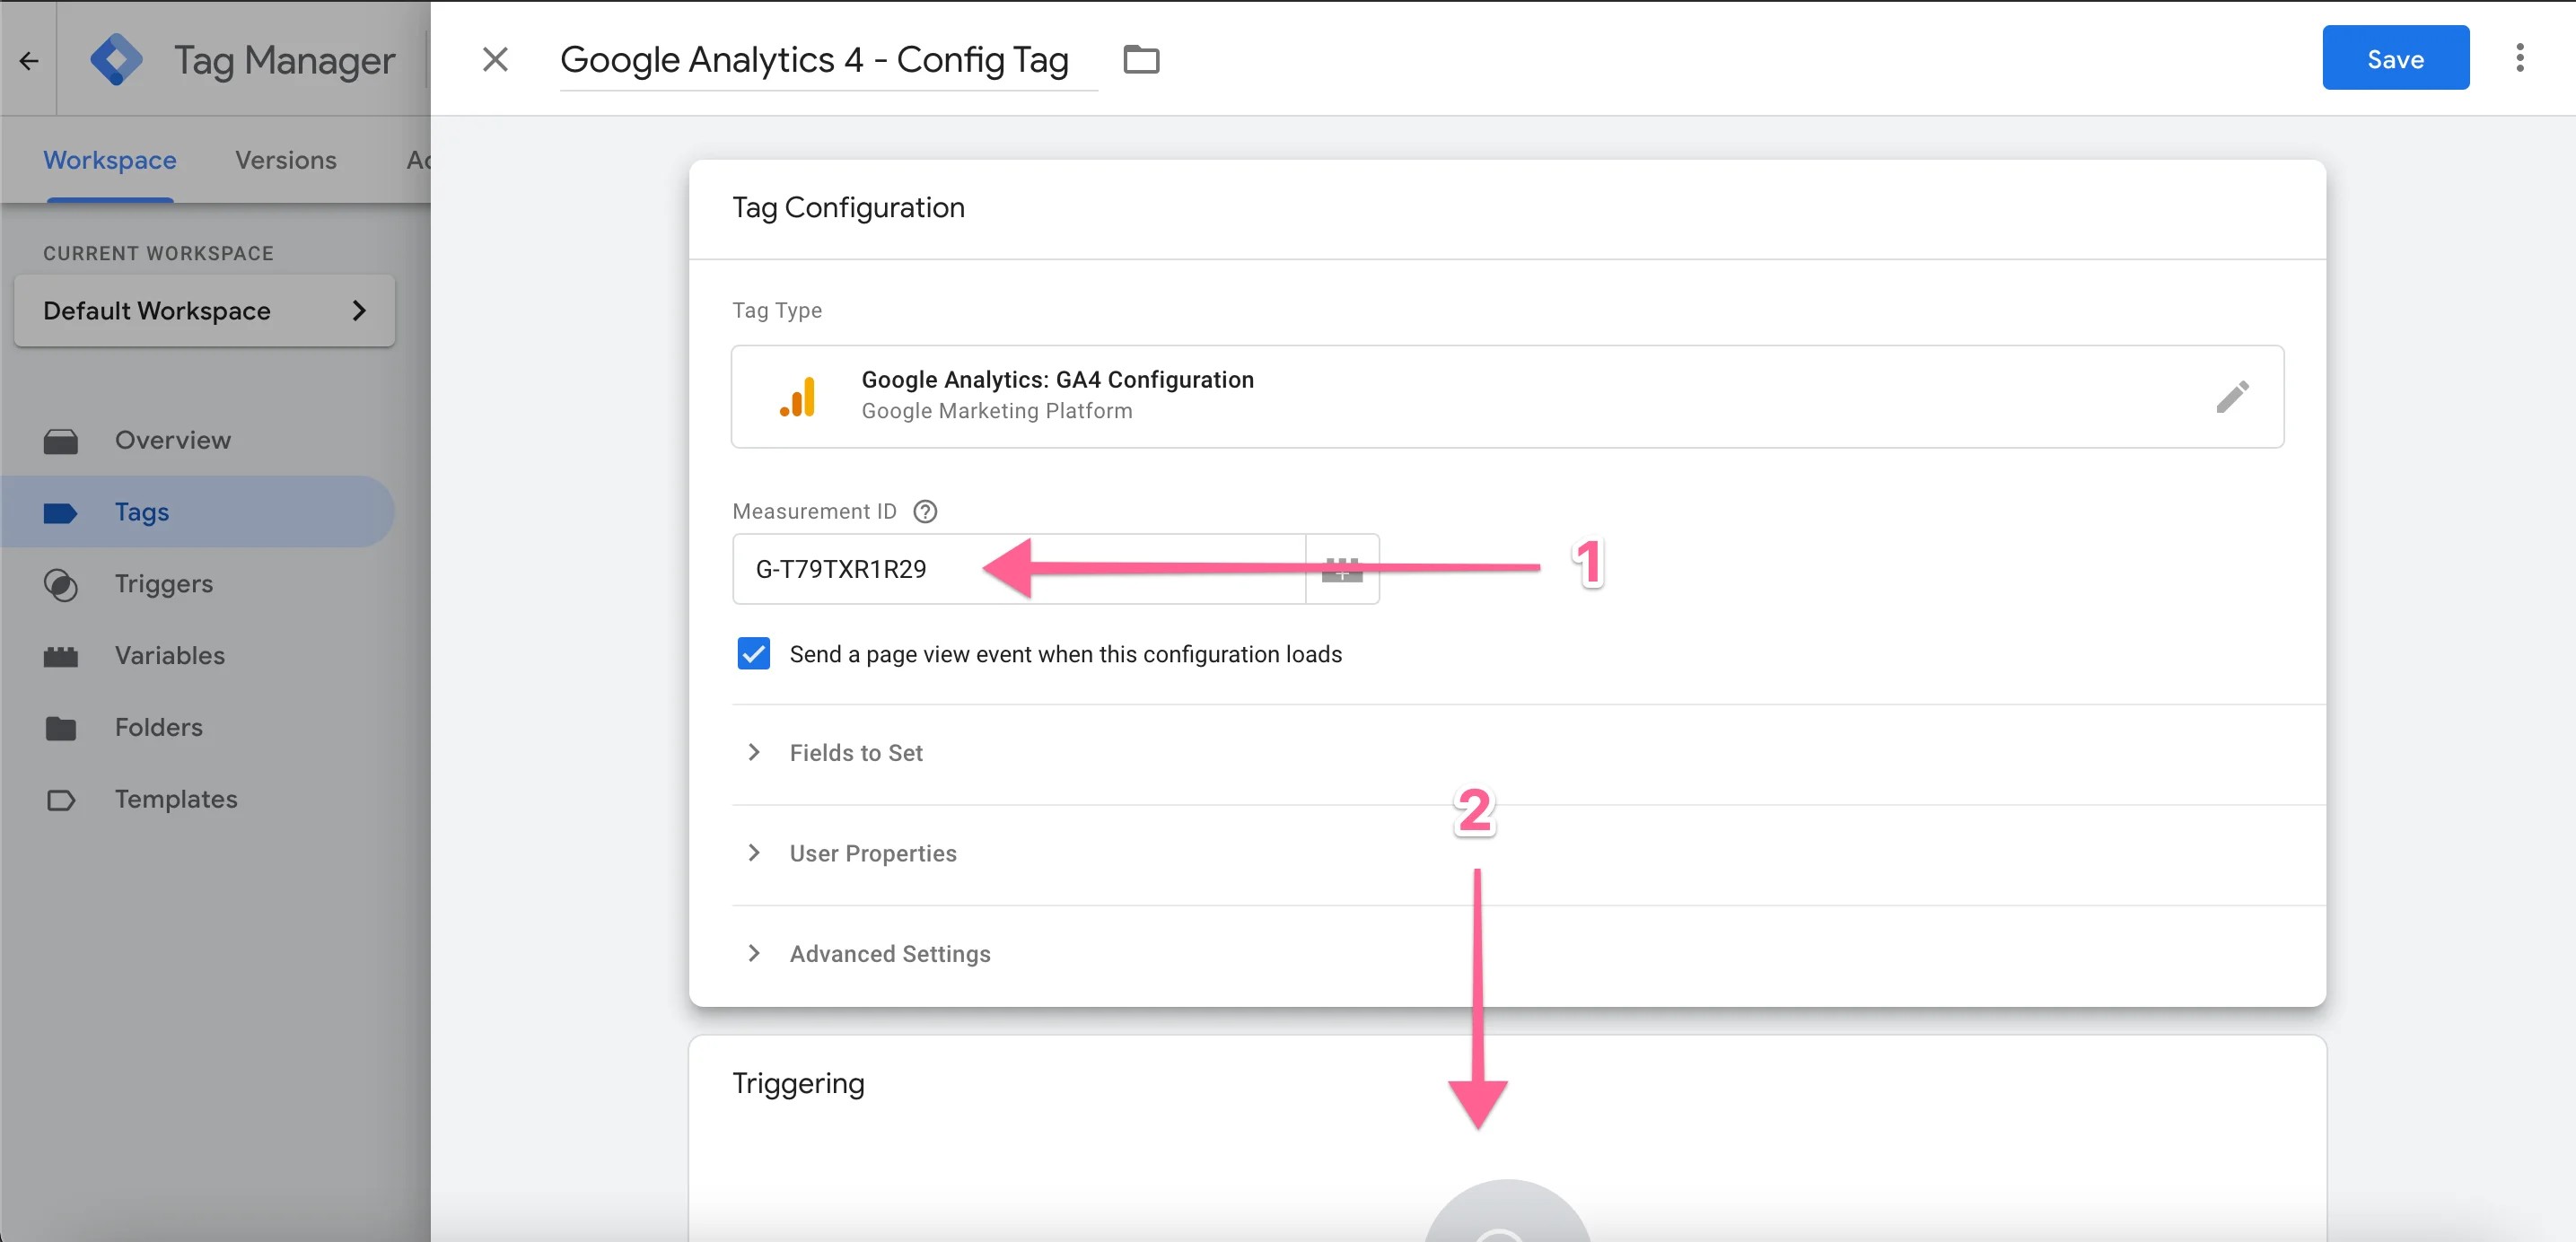 Google Analytics Configuration Tag Measurement ID in Tag Manager